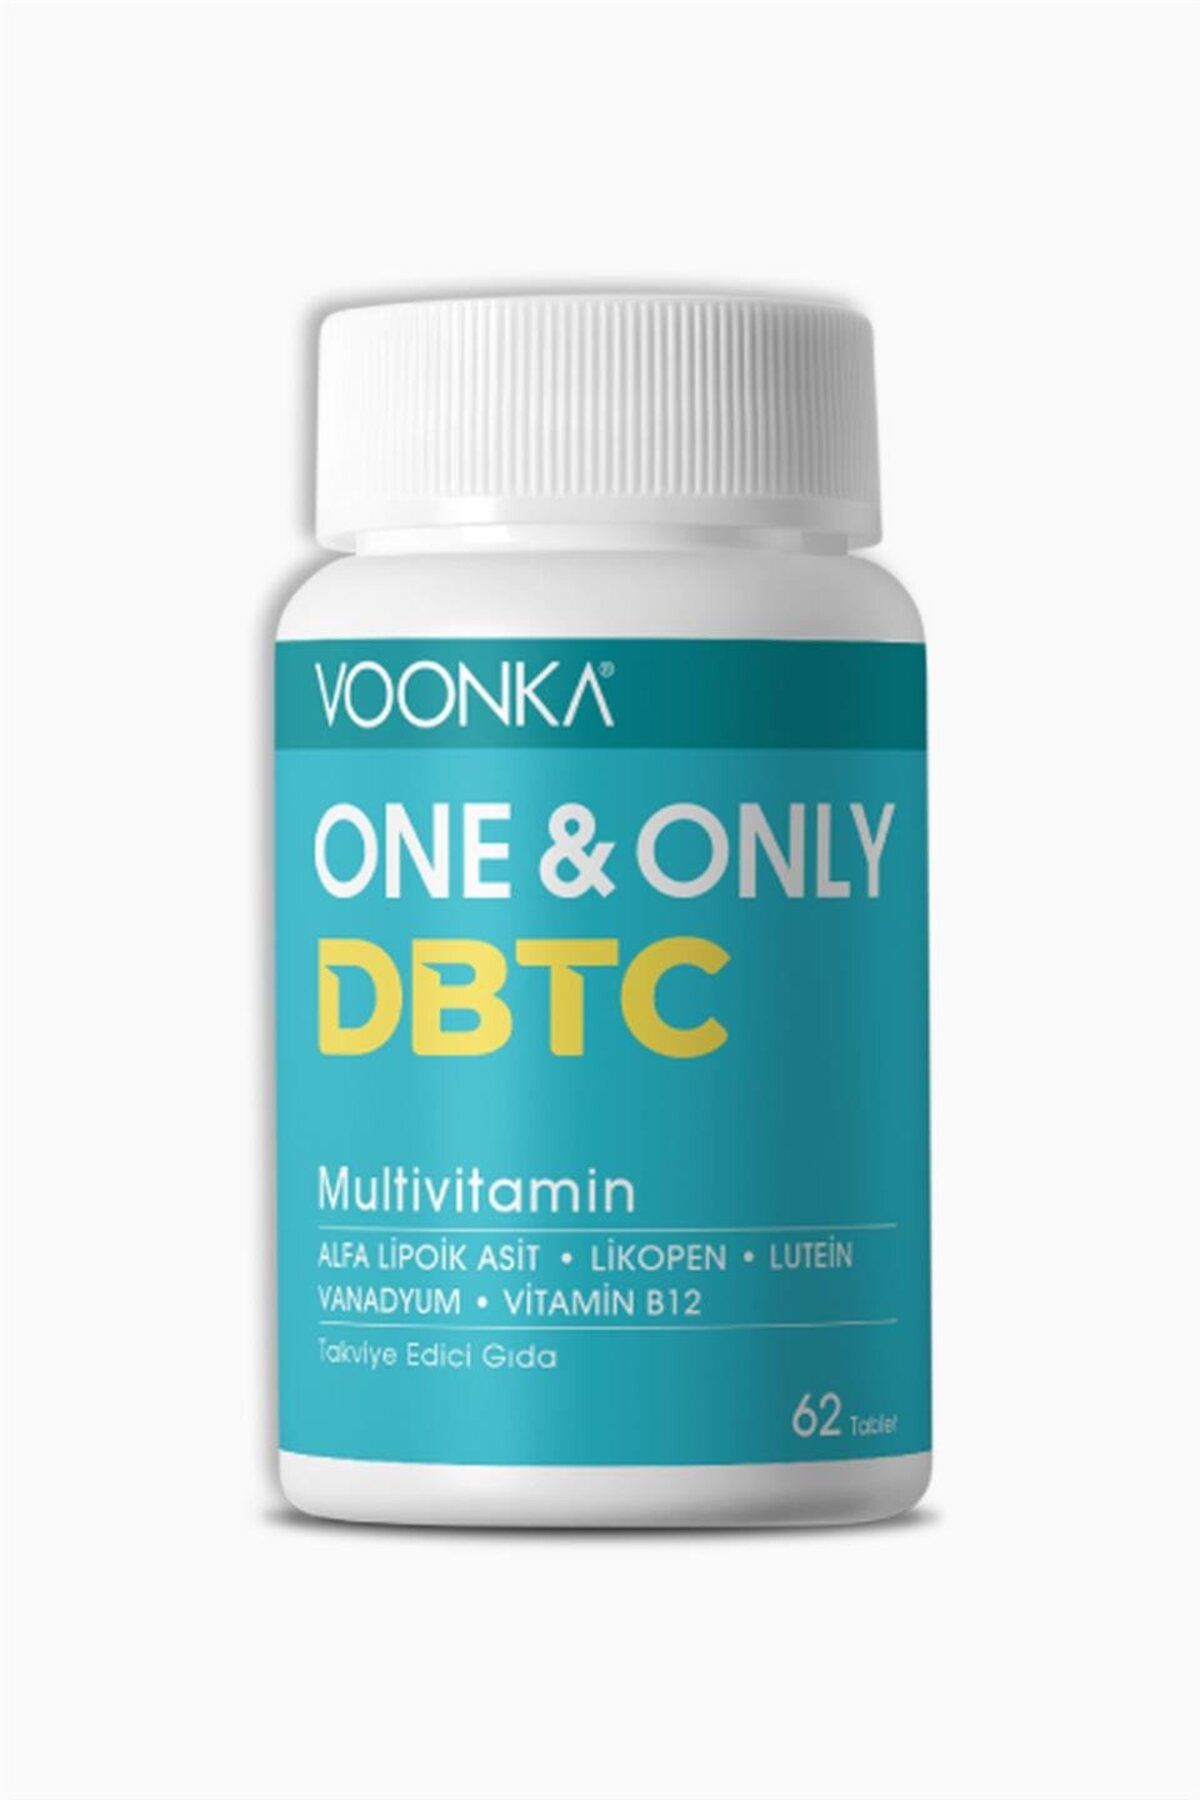 Voonka One & Only Dbtc Multivitamin 62 Tablet